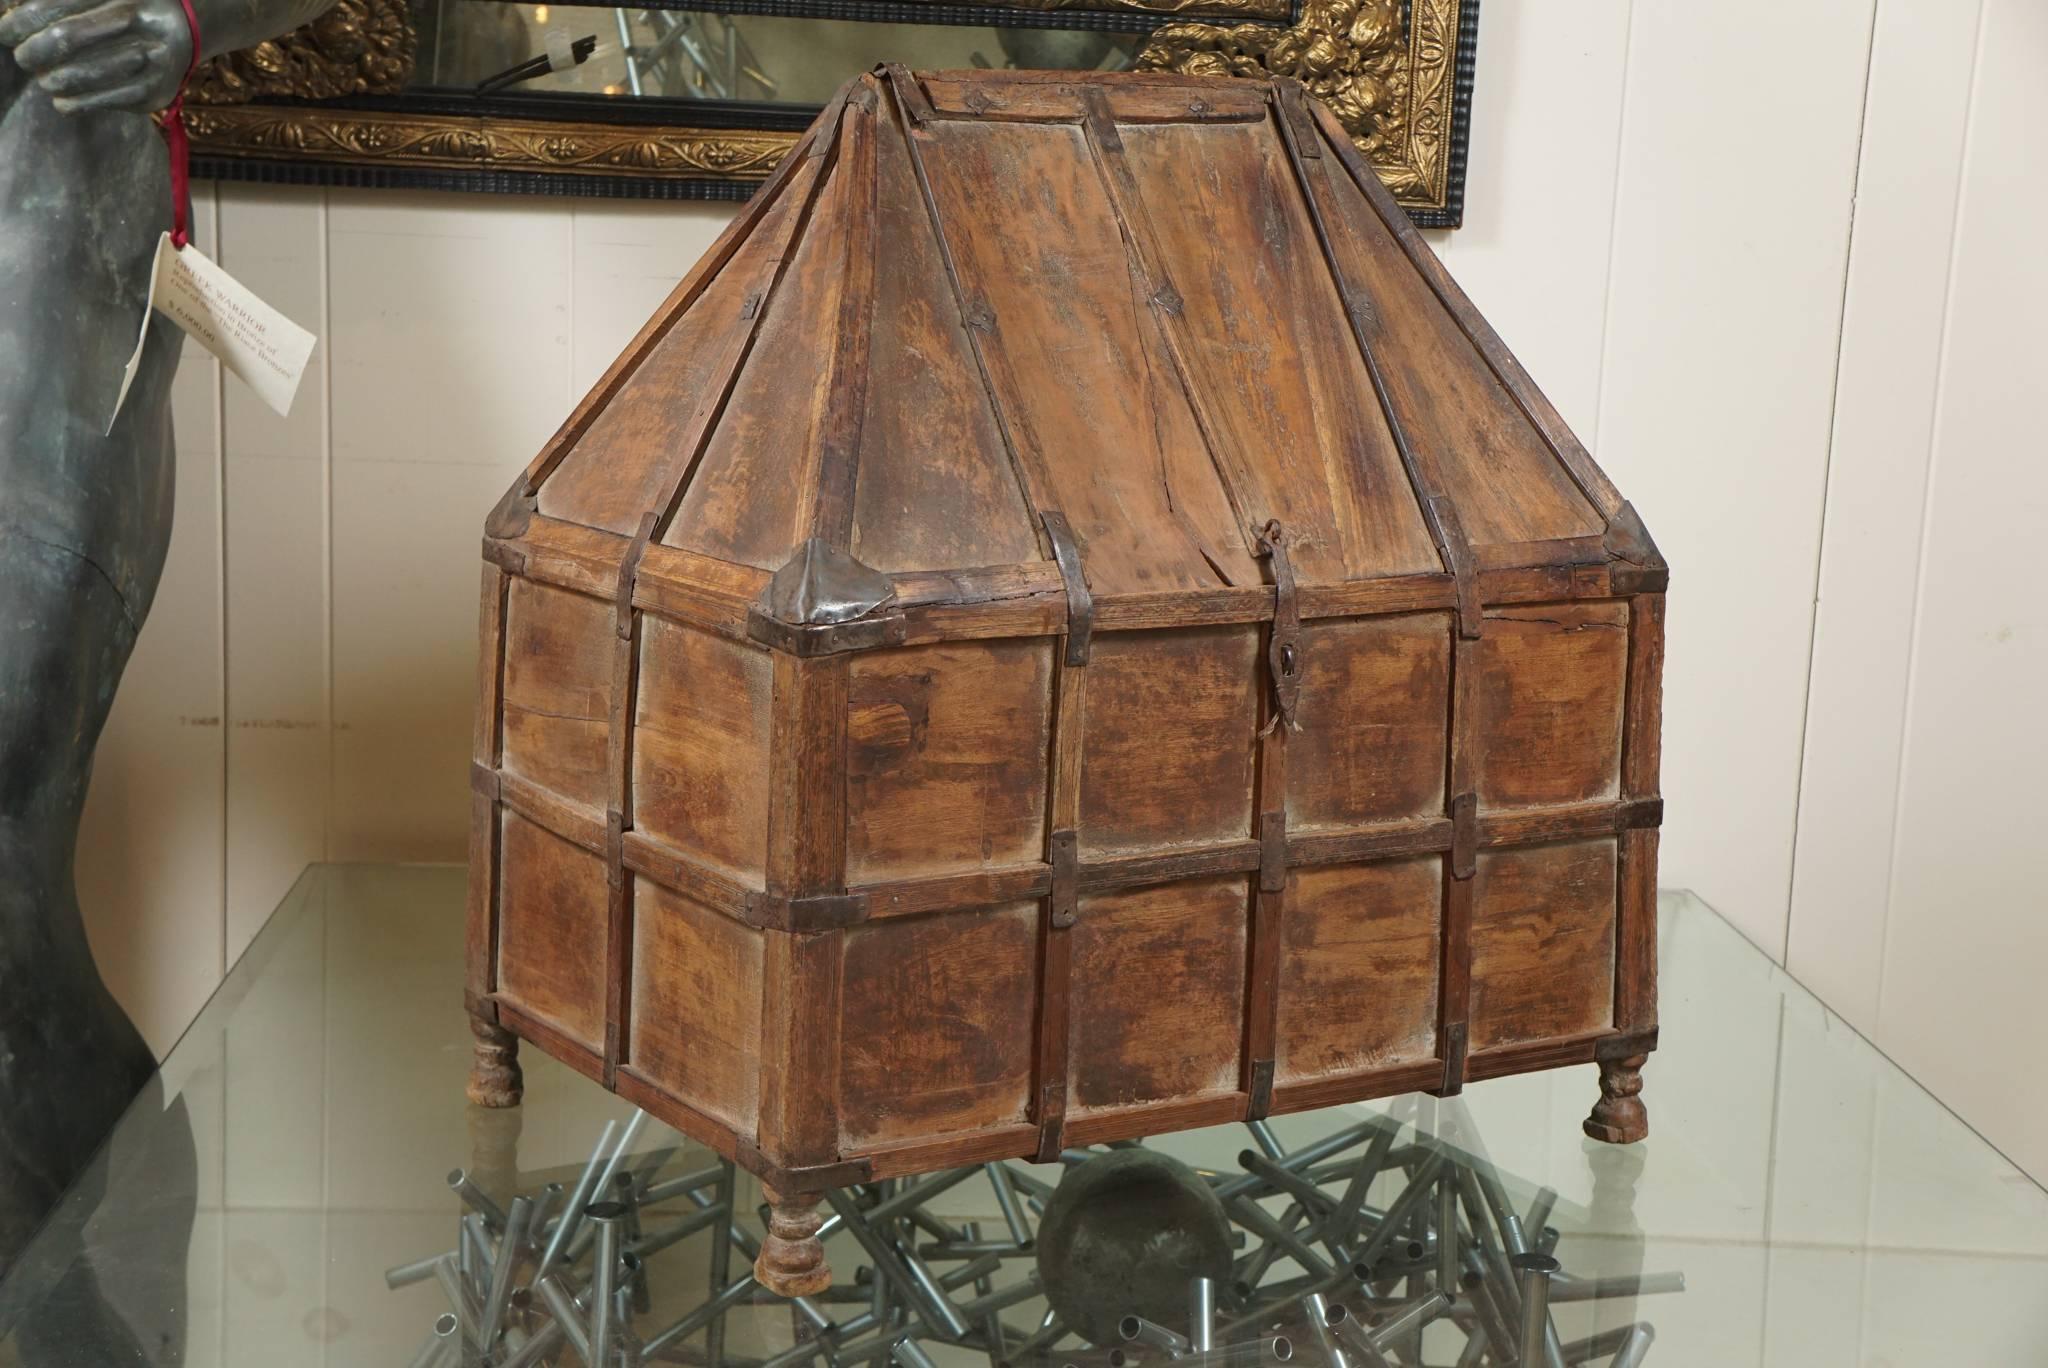 A Dowry storage chest. Steeple shaped box.